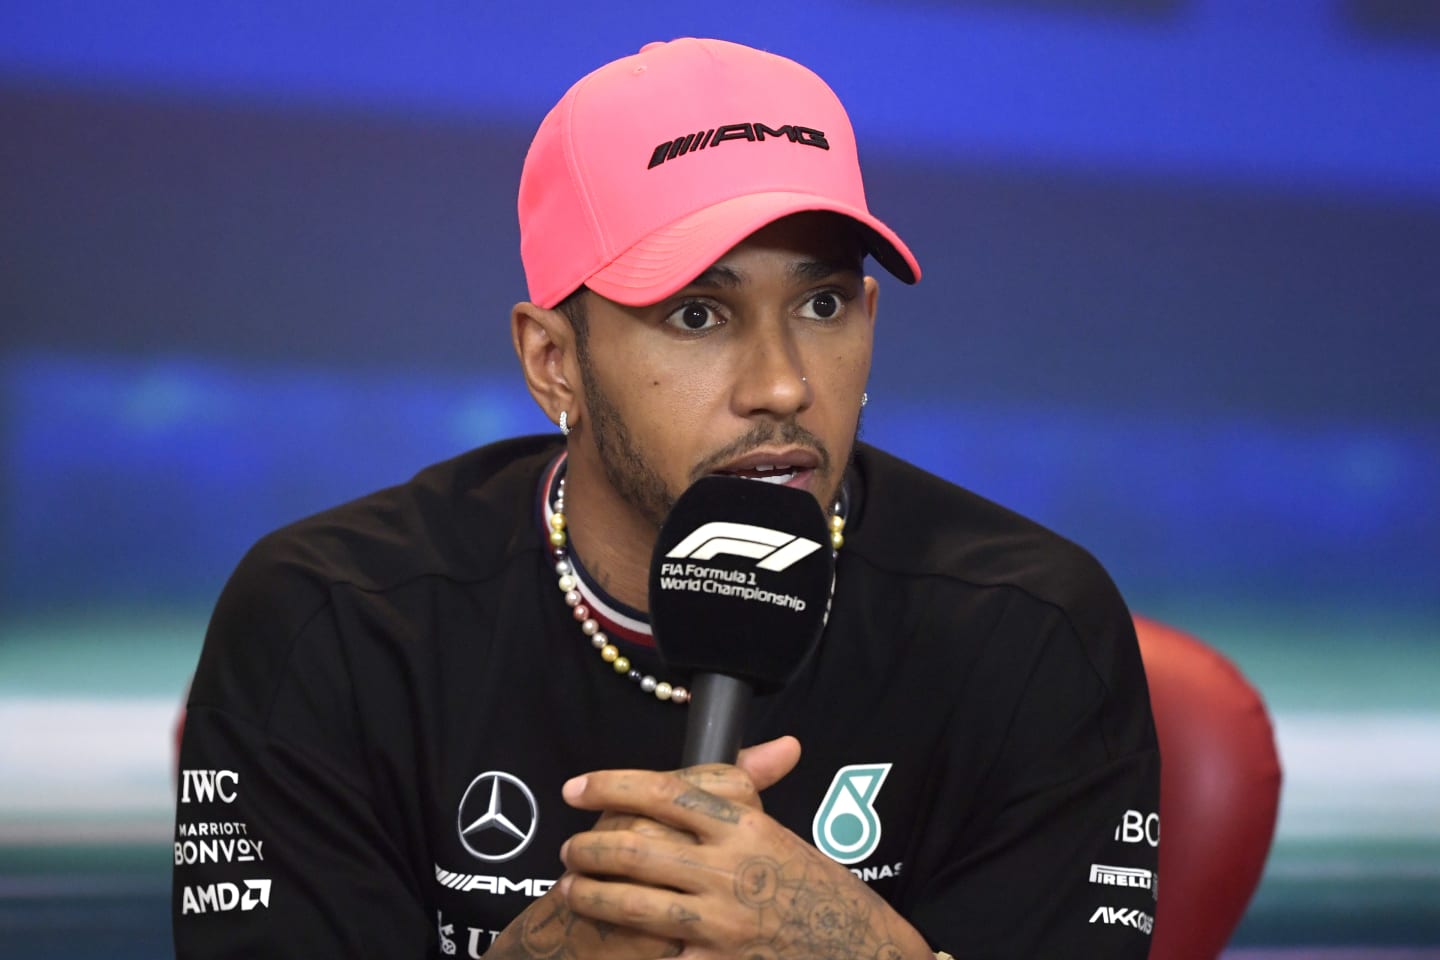 ABU DHABI, UNITED ARAB EMIRATES - NOVEMBER 17: Lewis Hamilton of Great Britain and Mercedes talks in a press conference during previews ahead of the F1 Grand Prix of Abu Dhabi at Yas Marina Circuit on November 17, 2022 in Abu Dhabi, United Arab Emirates. (Photo by Rudy Carezzevoli/Getty Images)